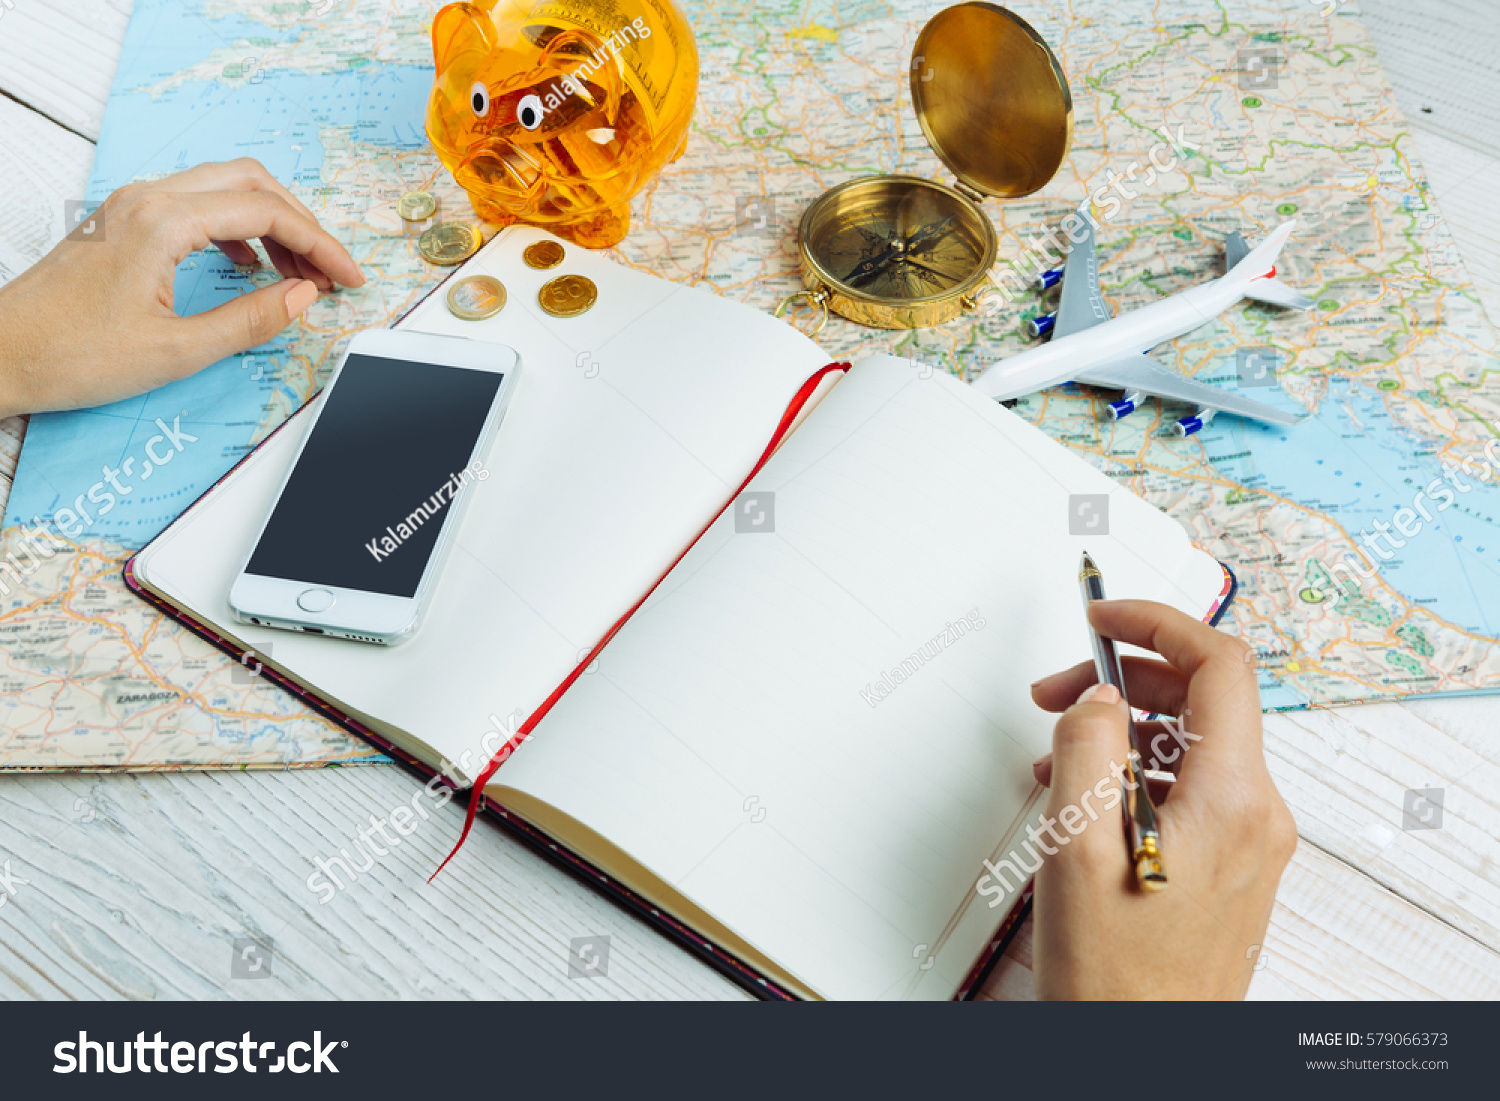 Bloger planning budget of trip Hands holding pen near notebook Table with traveling theme items mobile phone, map, compass, plane and piggy bank Empty mockup notes, your can place text logo images.  #579066373